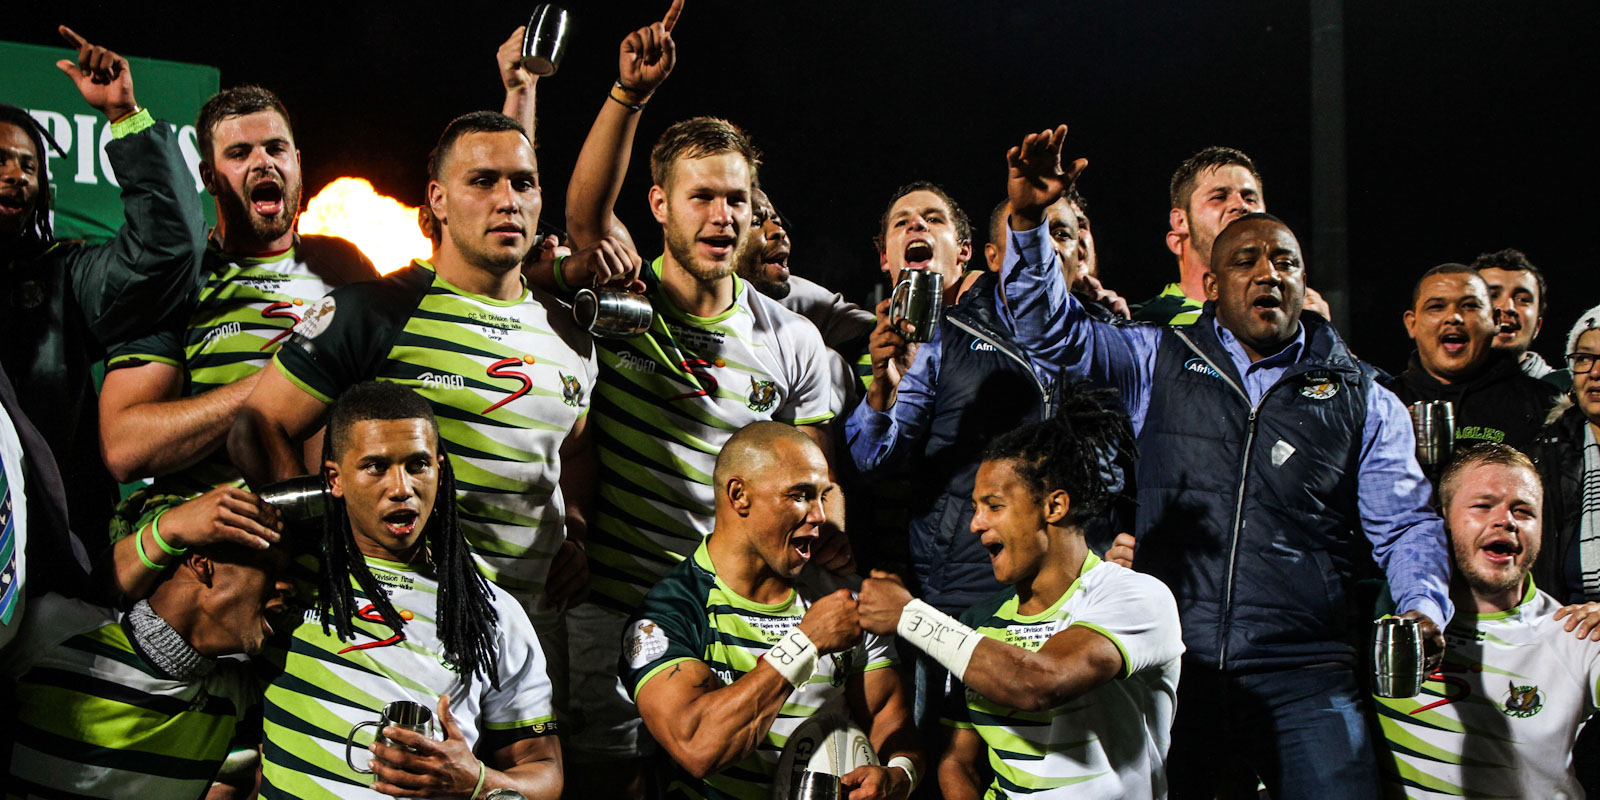 The SWD Eagles won the Carling Currie Cup First Division in 2018.